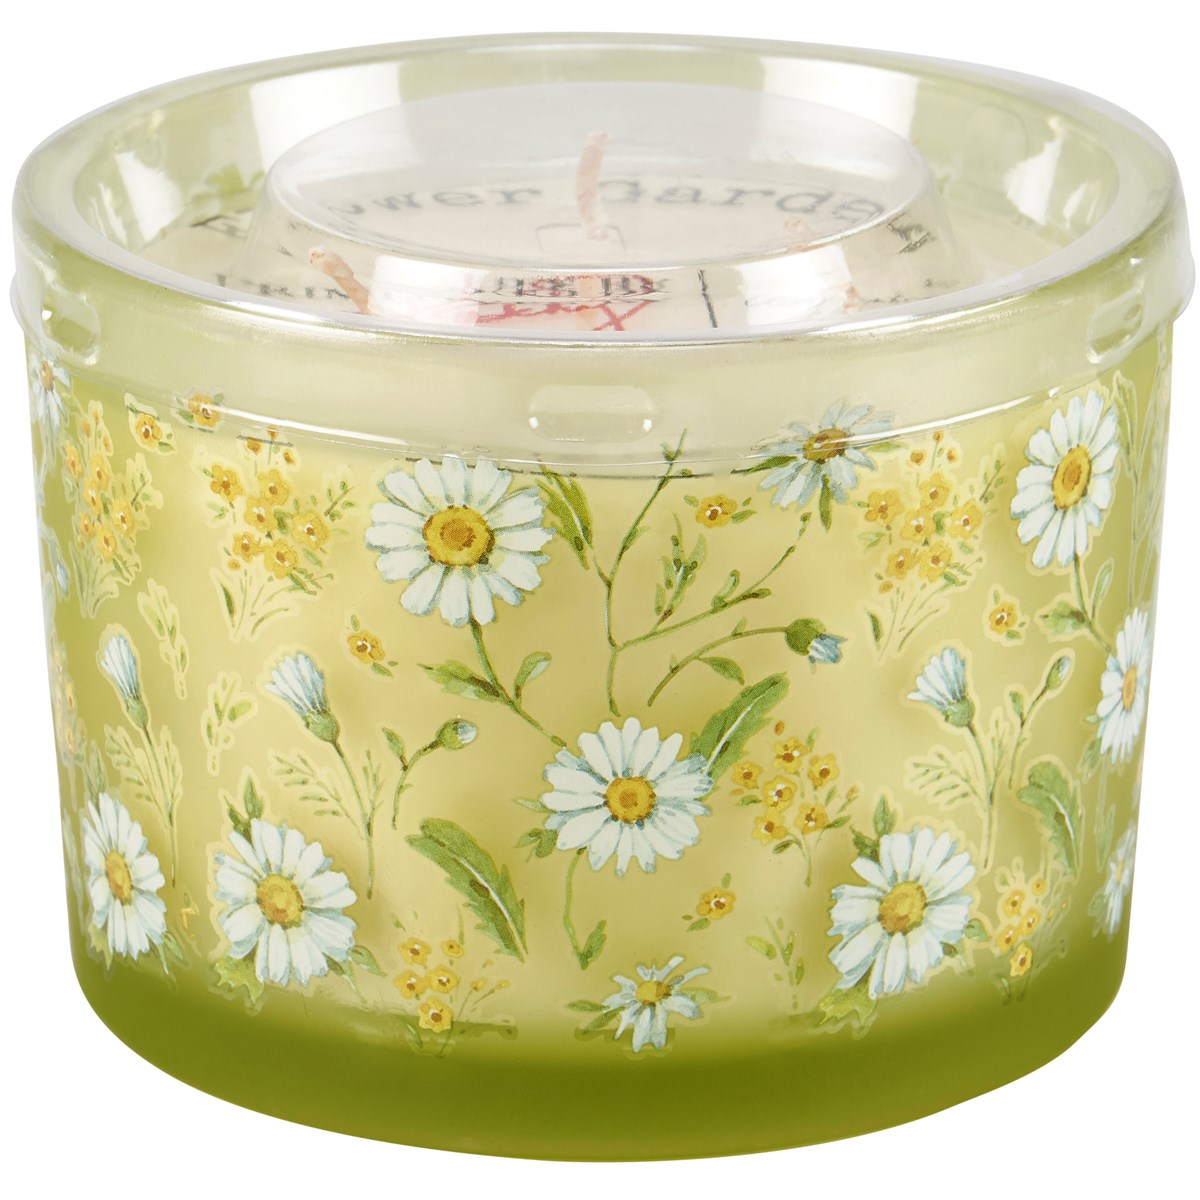 Daisy Candle - Soy Wax, Glass, Cotton